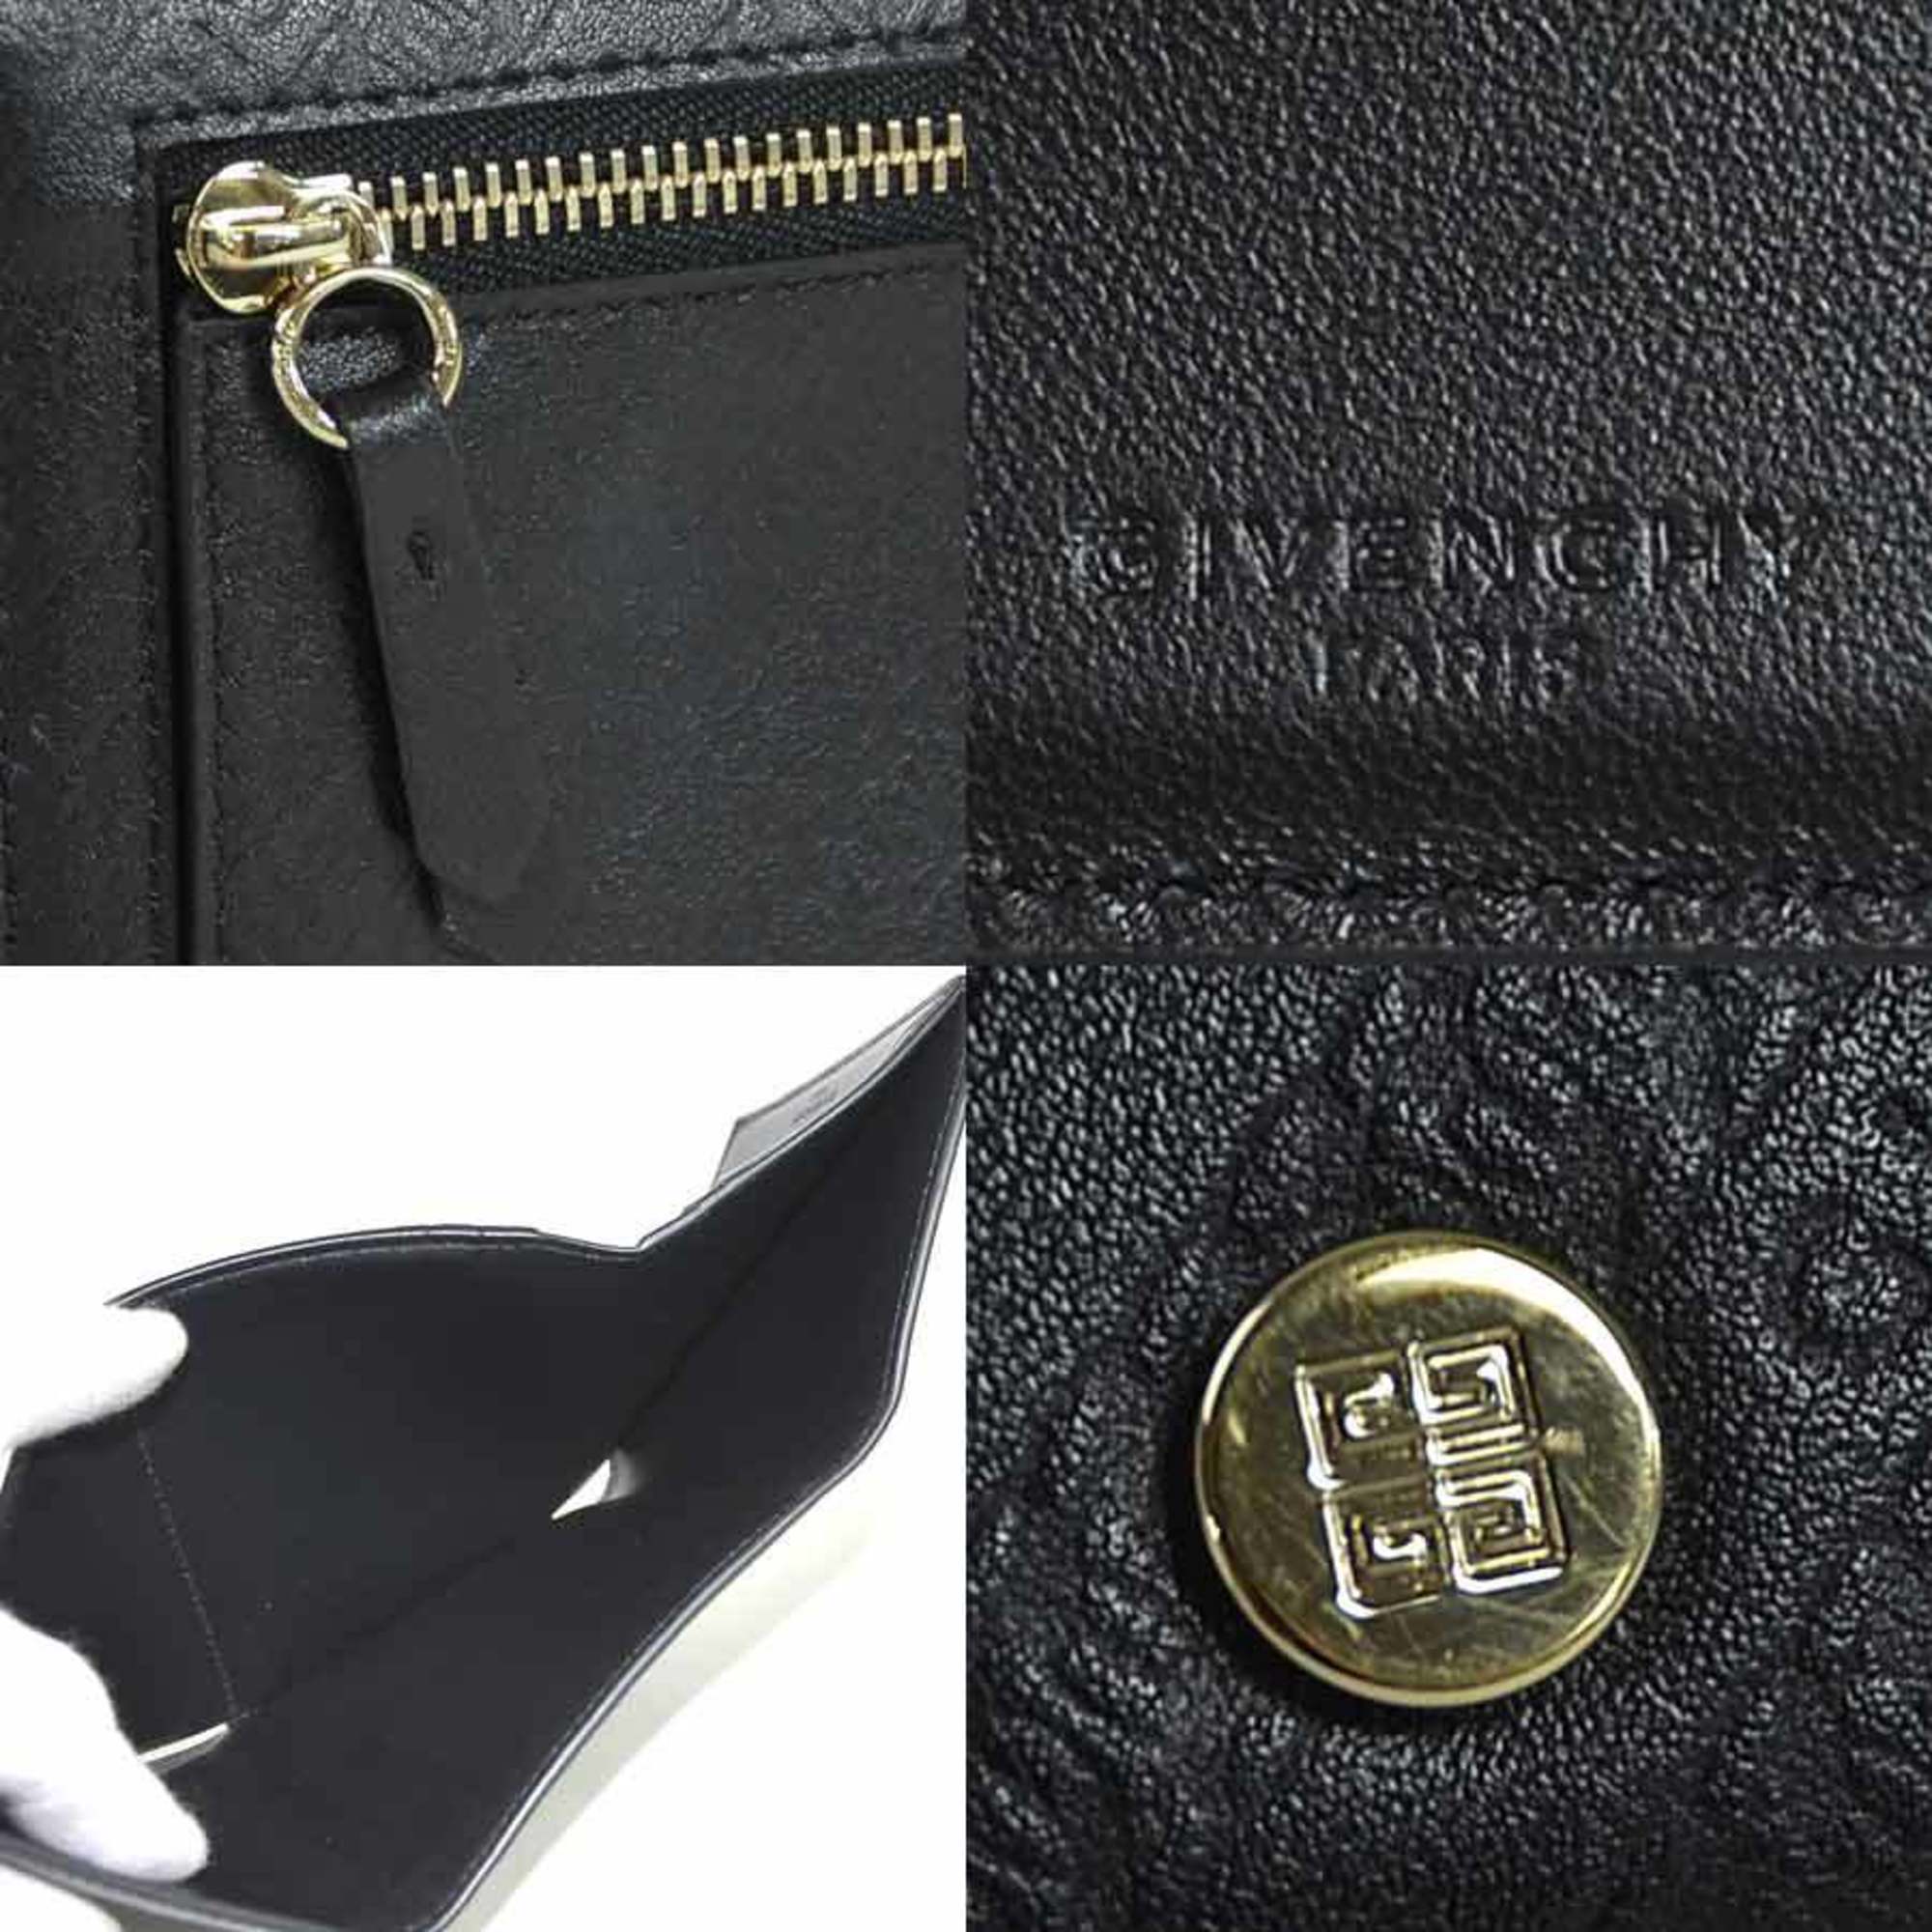 Givenchy Tri-Fold Wallet Black Leather Gold Hardware Ladies